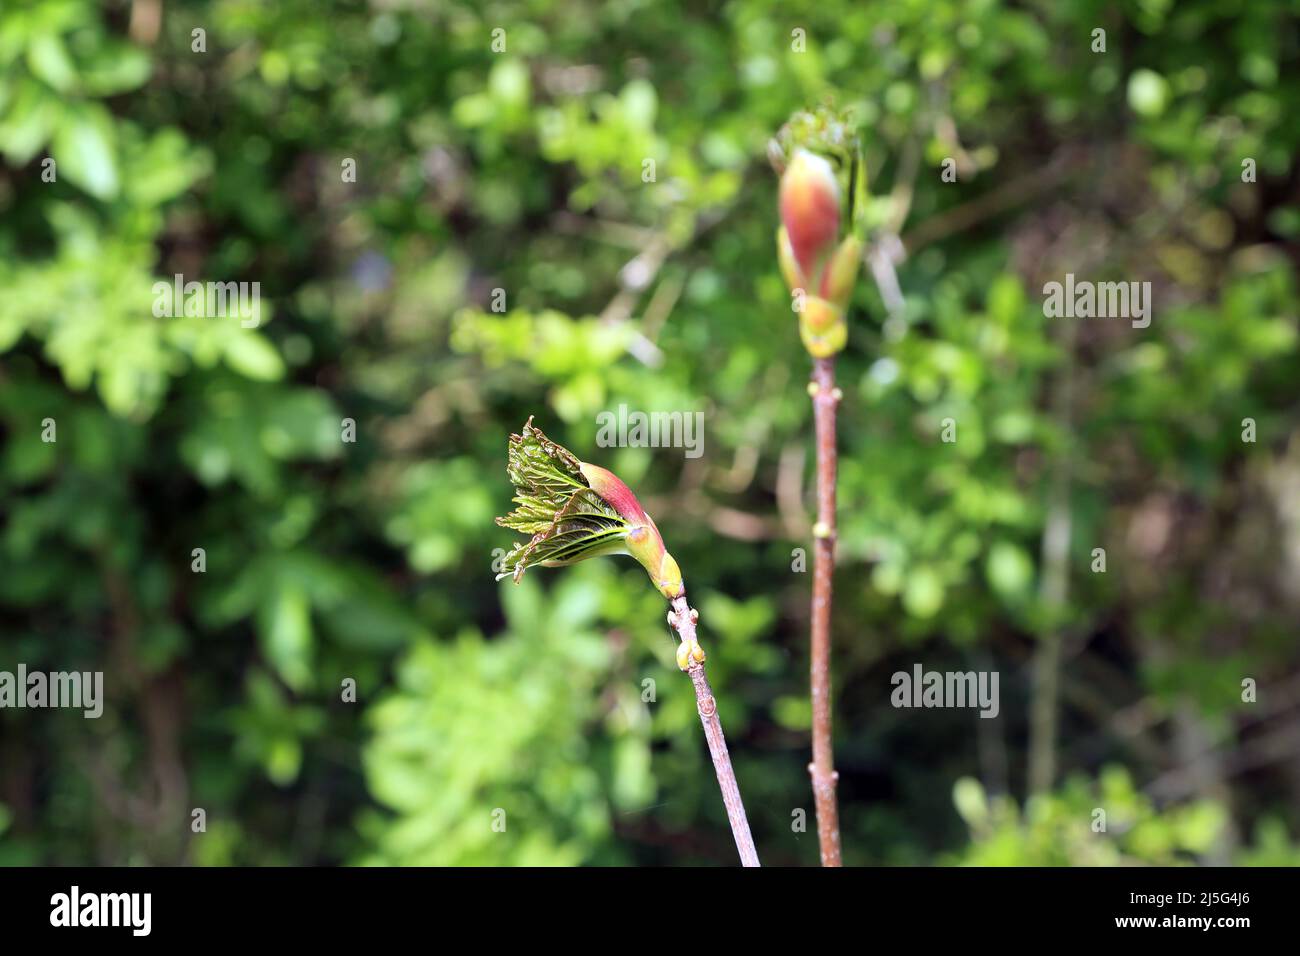 Young leaves coming out of bud on a sycamore tree in Spong Wood near Elmsted on the Kent Downs above Ashford, Kent, England, United Kingdom Stock Photo